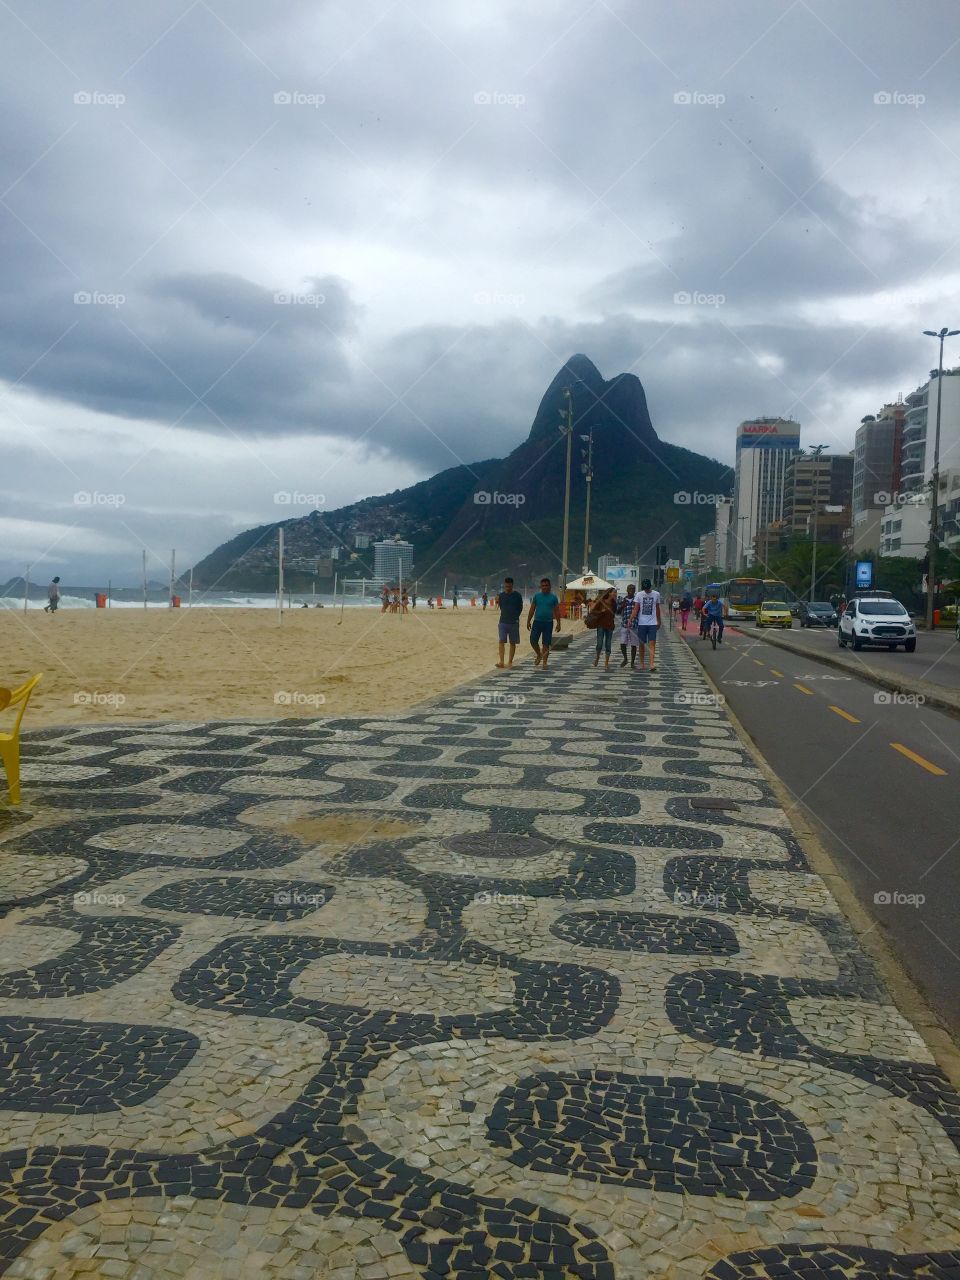 Cloudy beach. A shot of my point of view during my trip to Rio de Janeiro in Brazil. Loved it!!